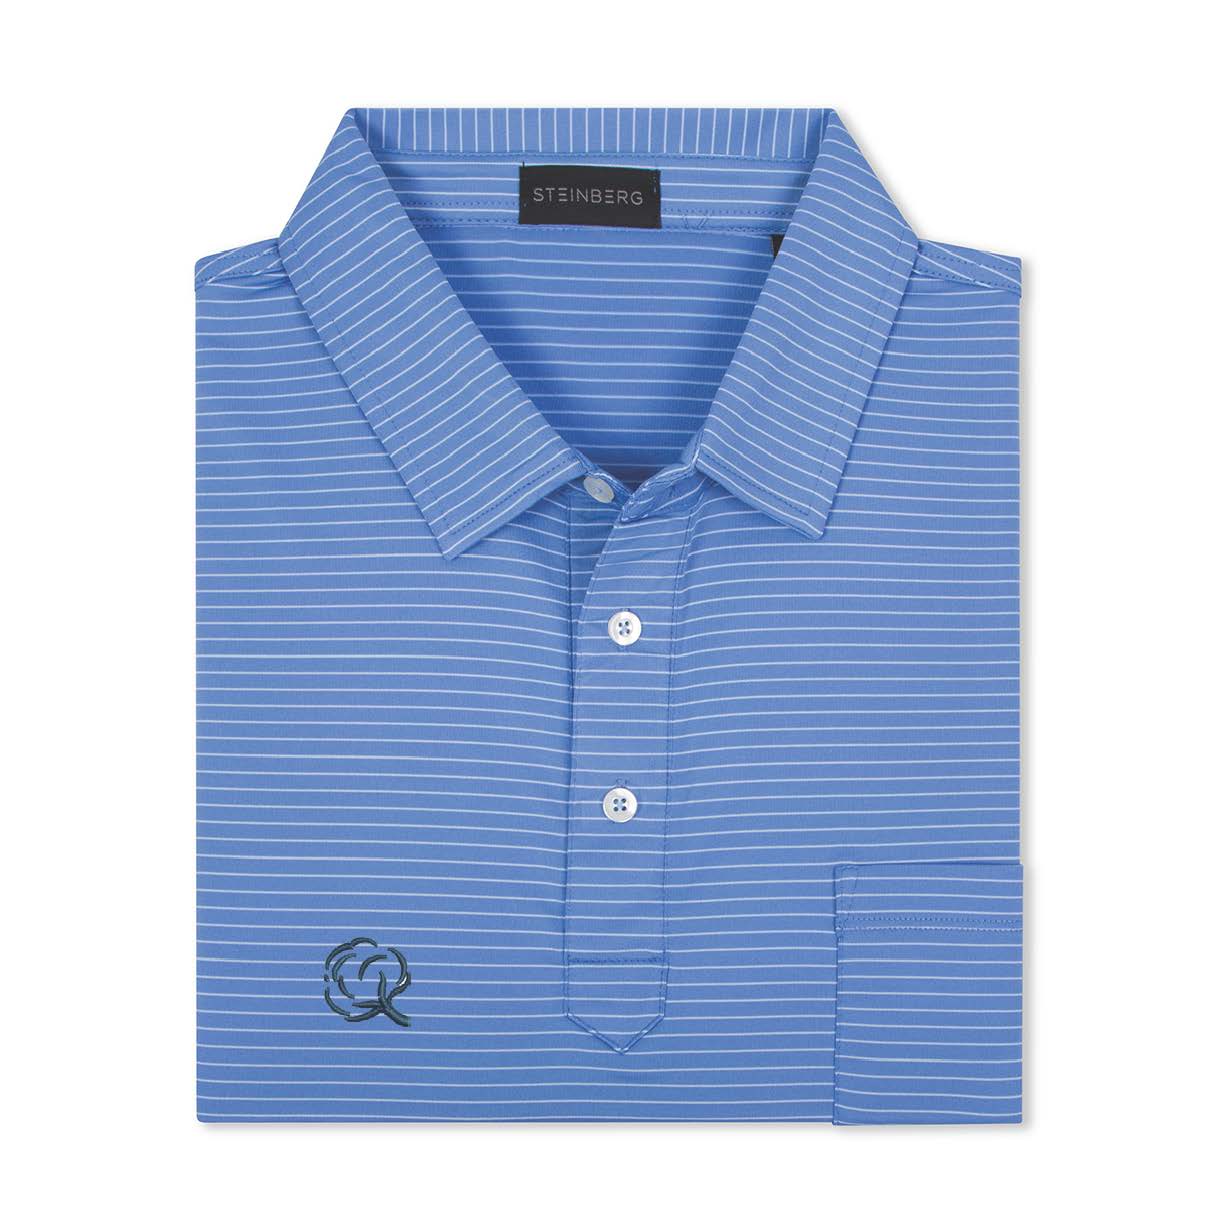 The Airmail Performance Polo Cotton Collection